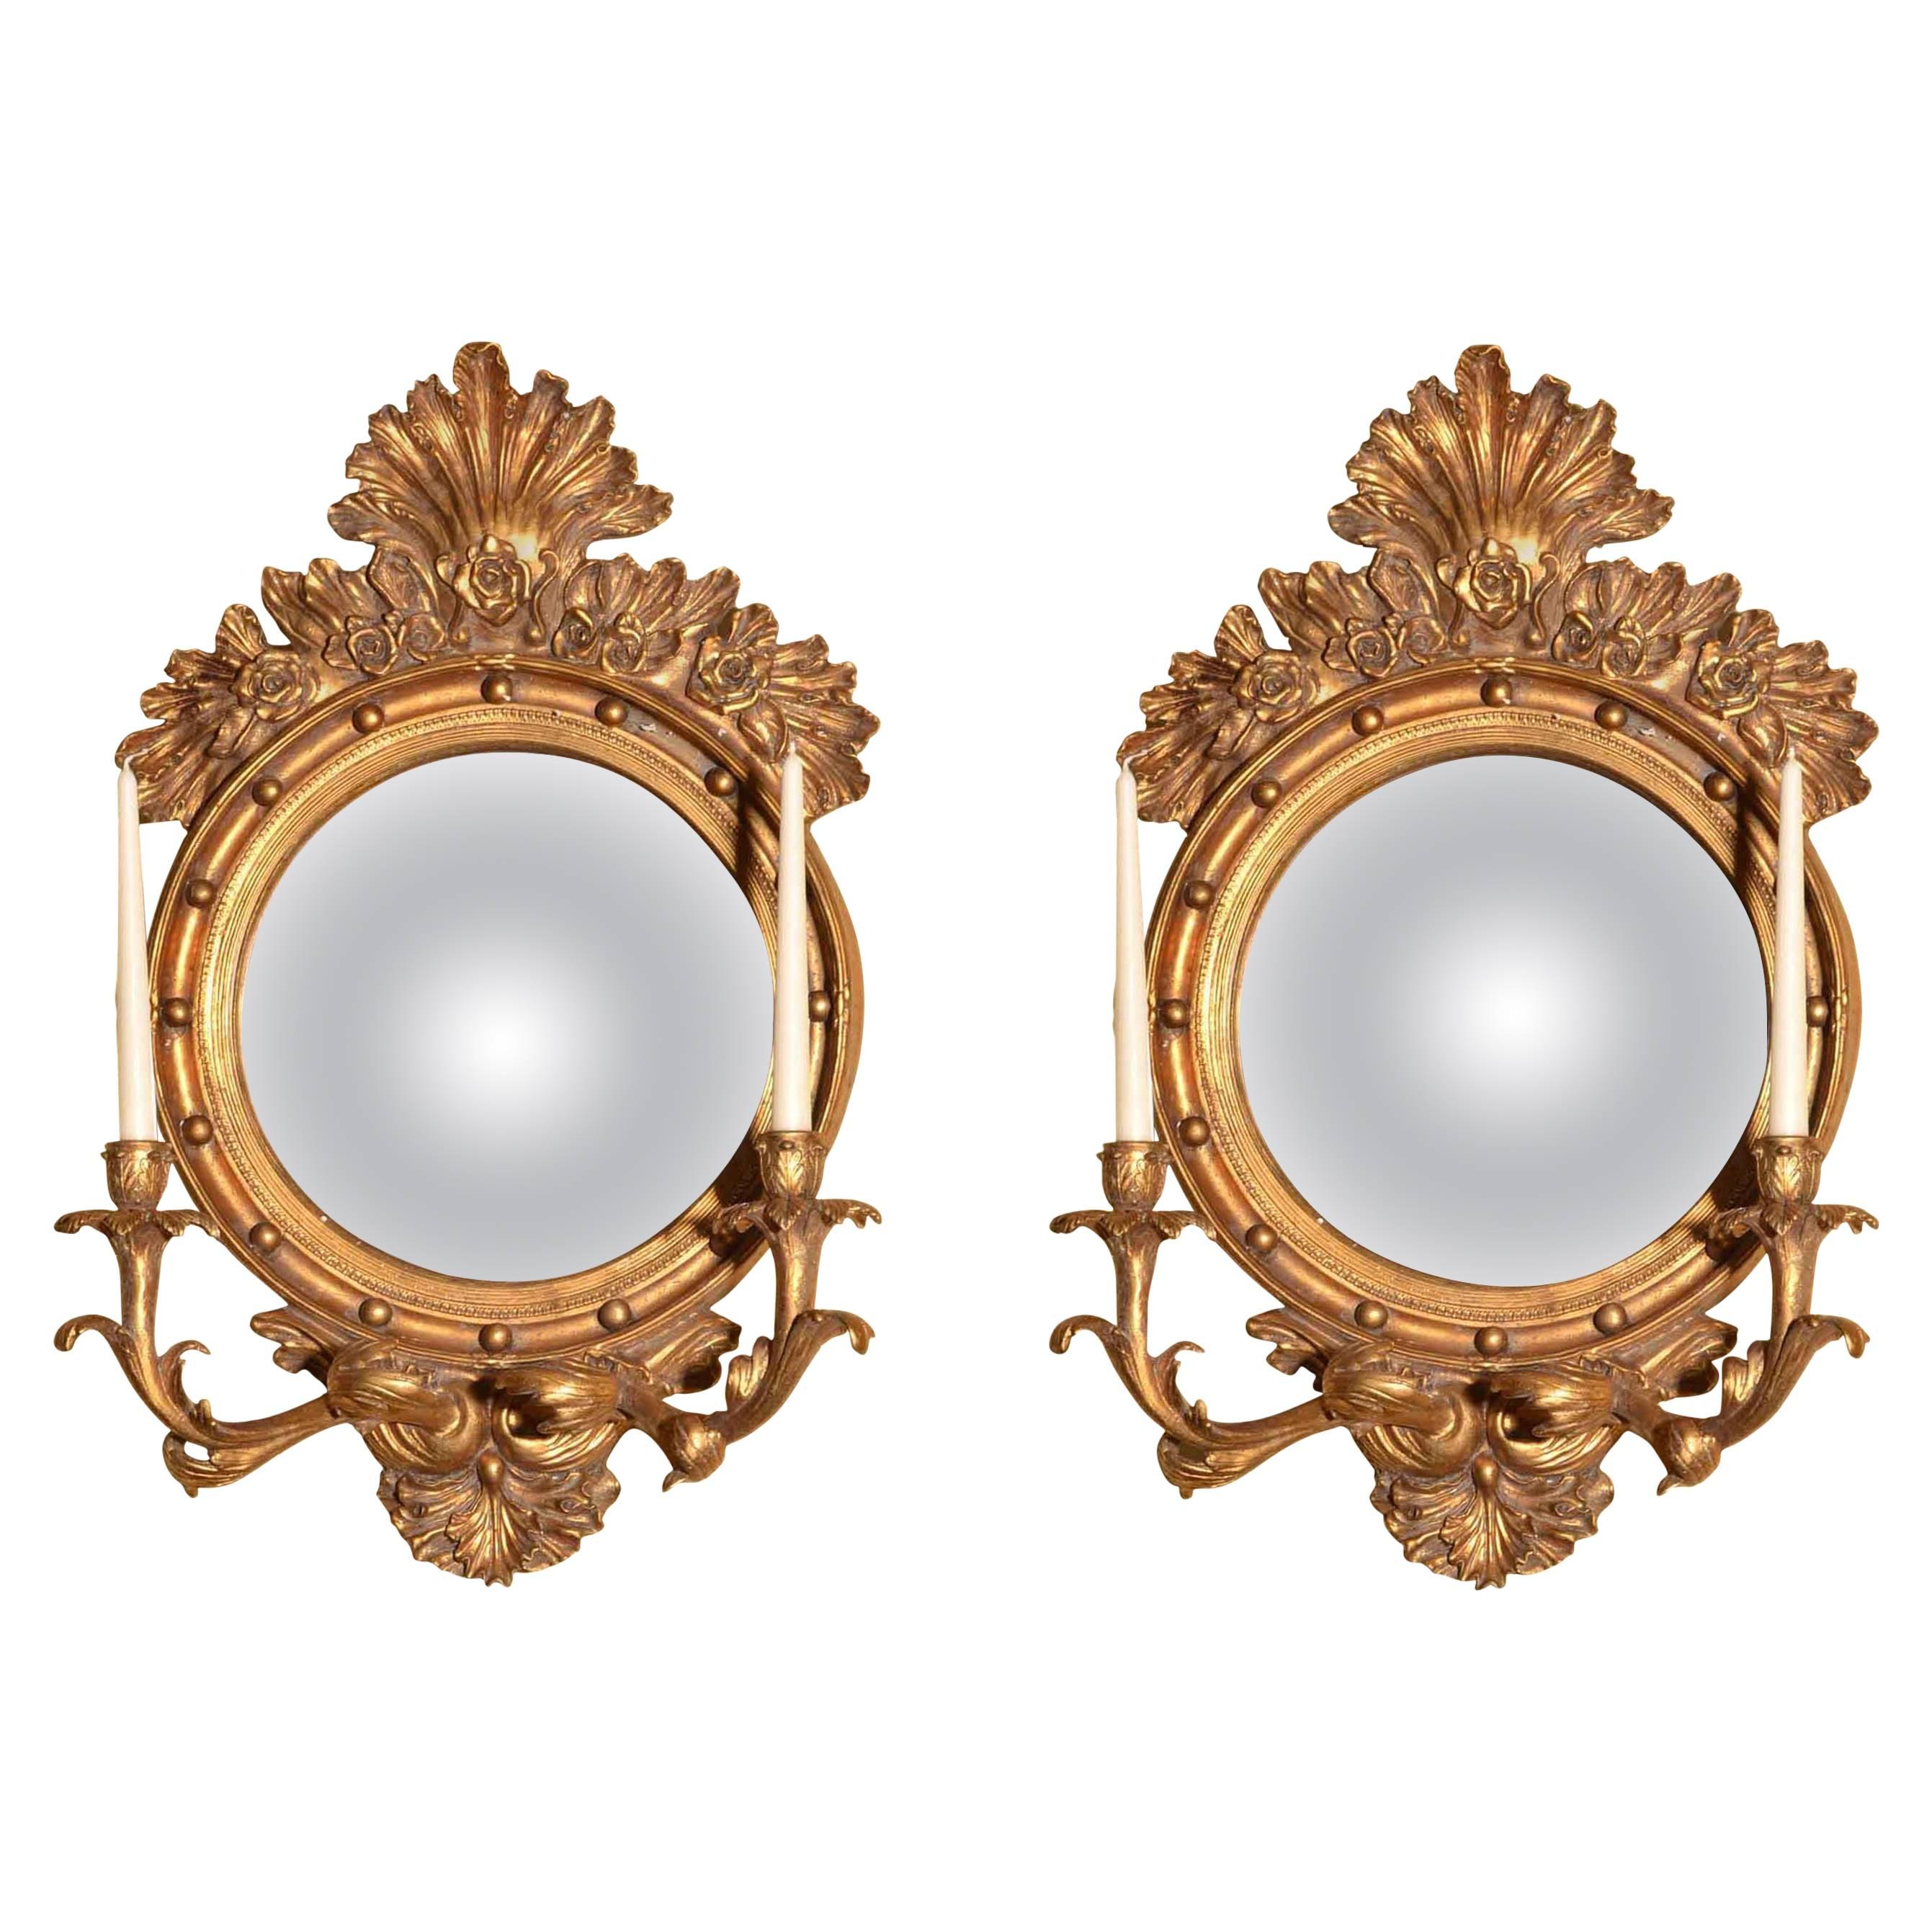 Pair of Italian Gilded Convex Mirror with Candleholders